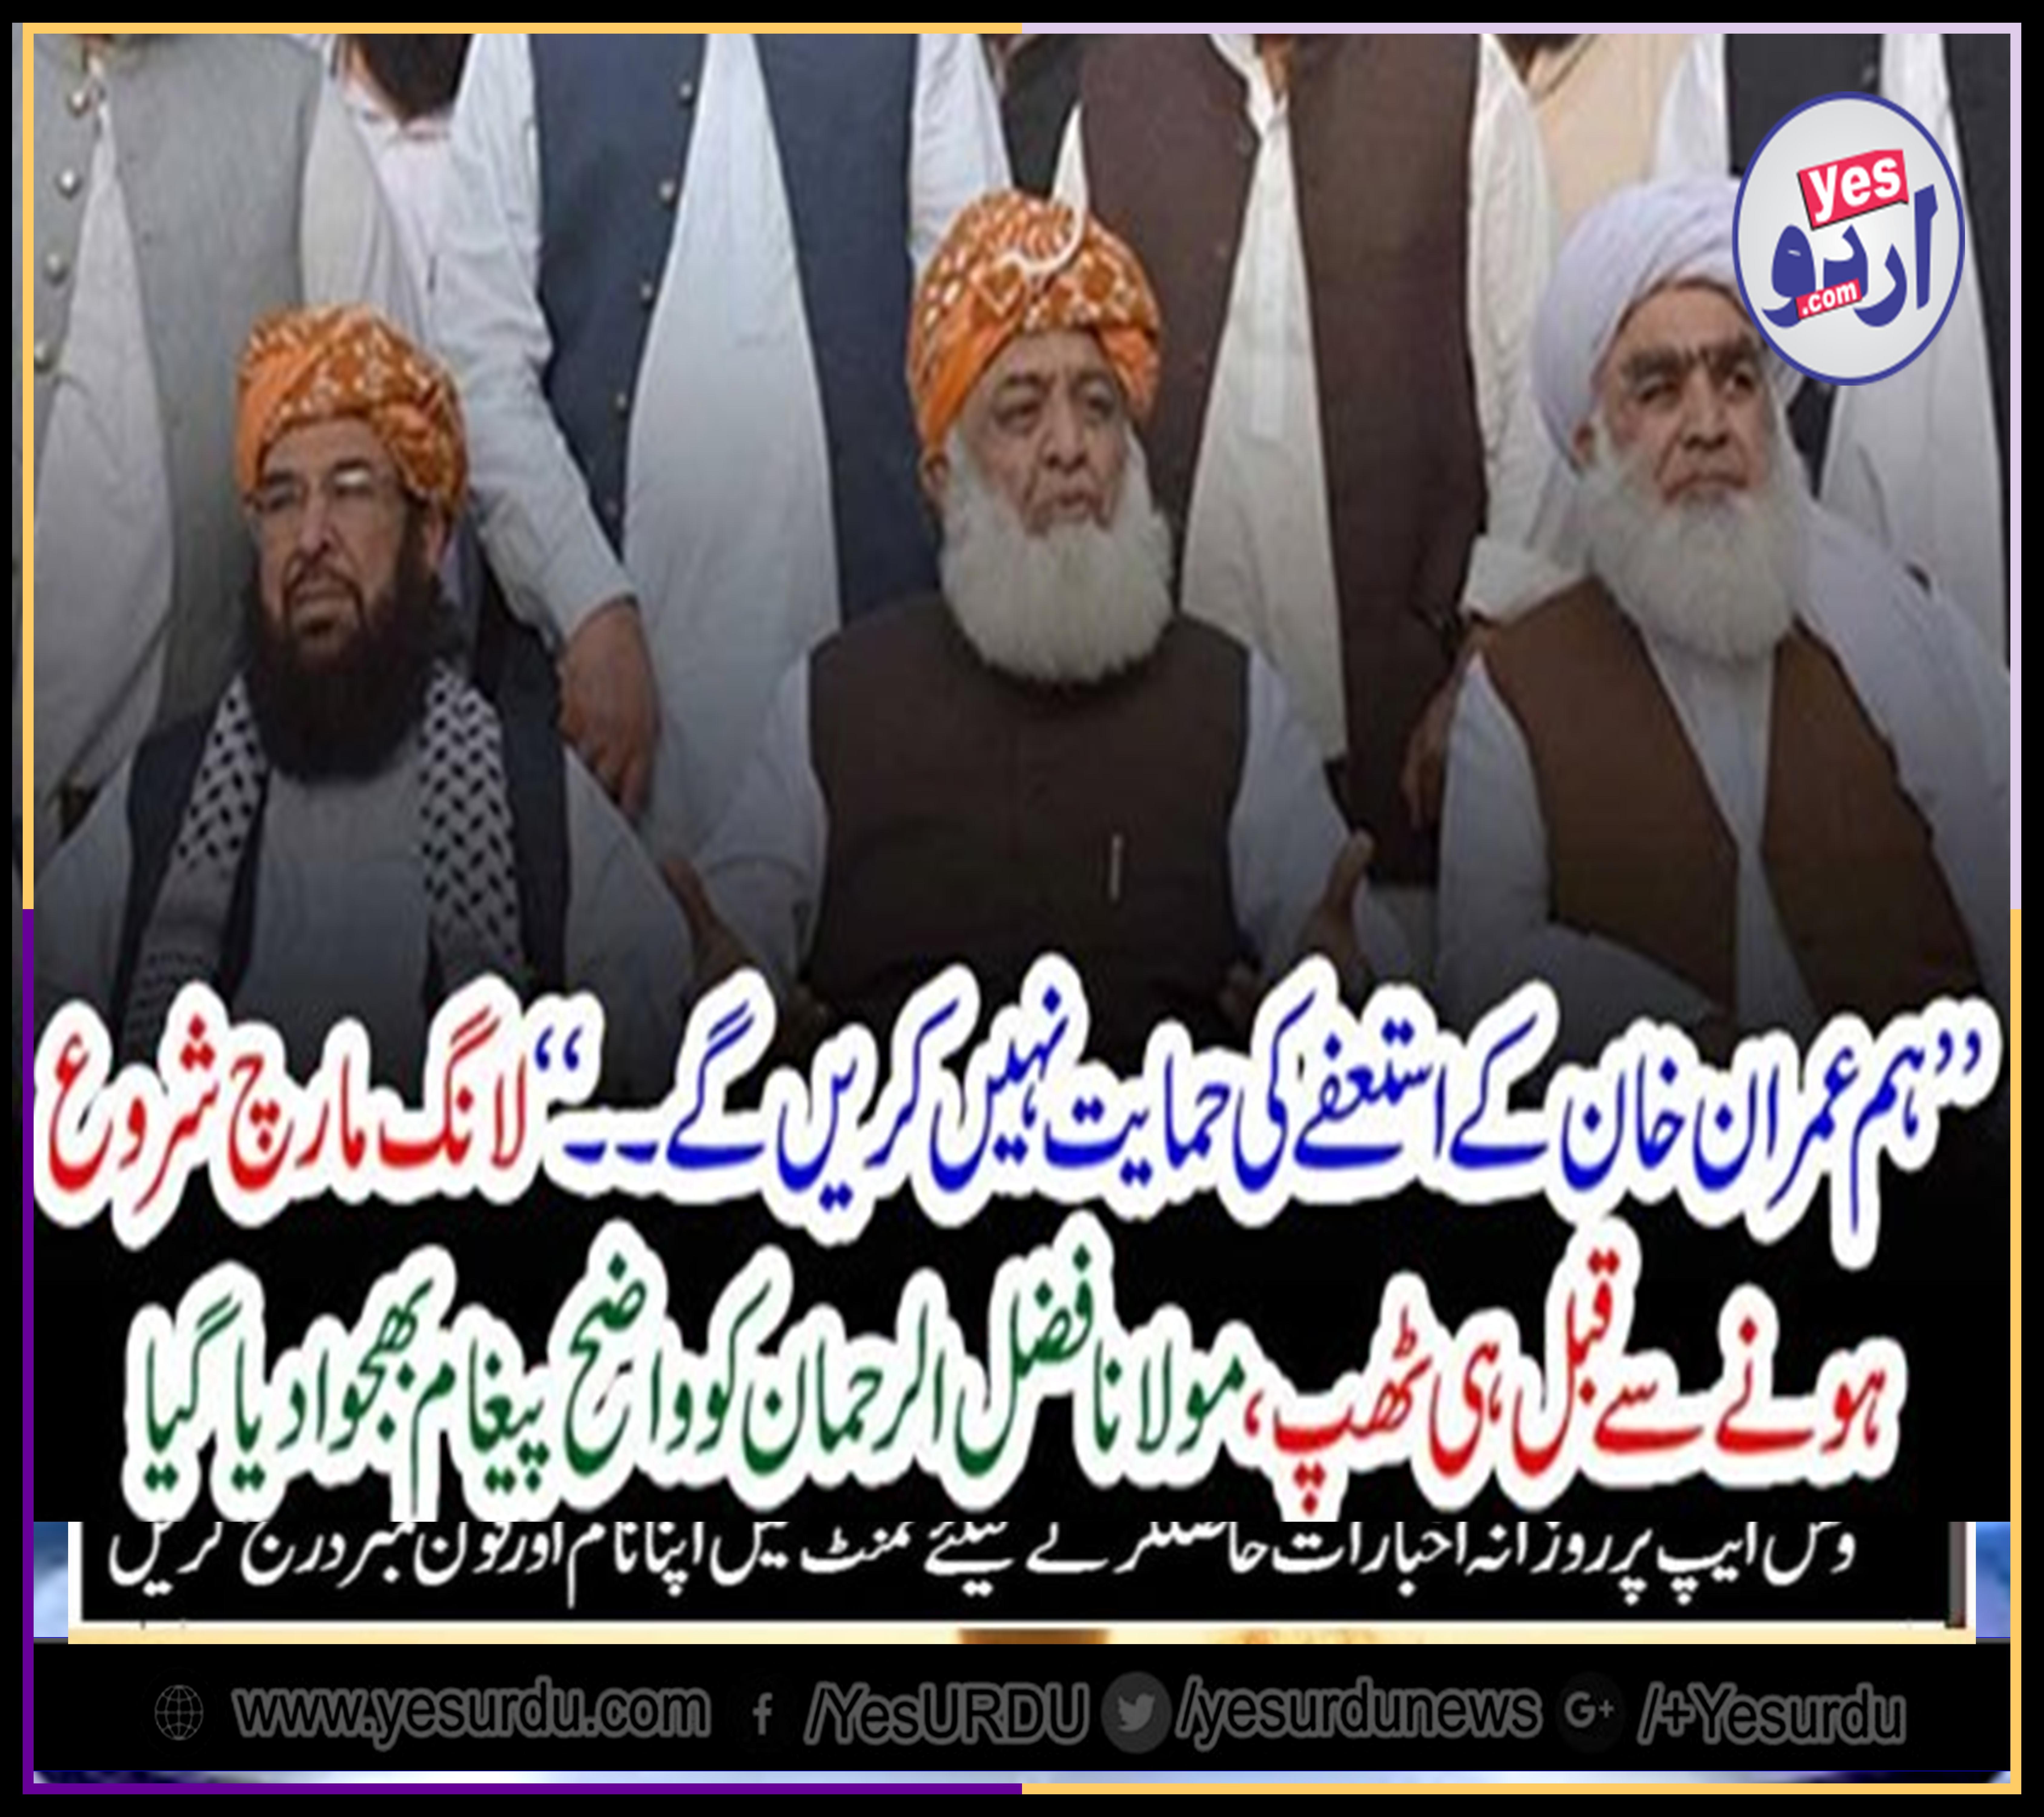 WHO, WILL, NOT, SUPPORT, MOLANA FAZAL UR RAHMAN, CLEAR, MESSAGE, DELIVERED, TO, HIM